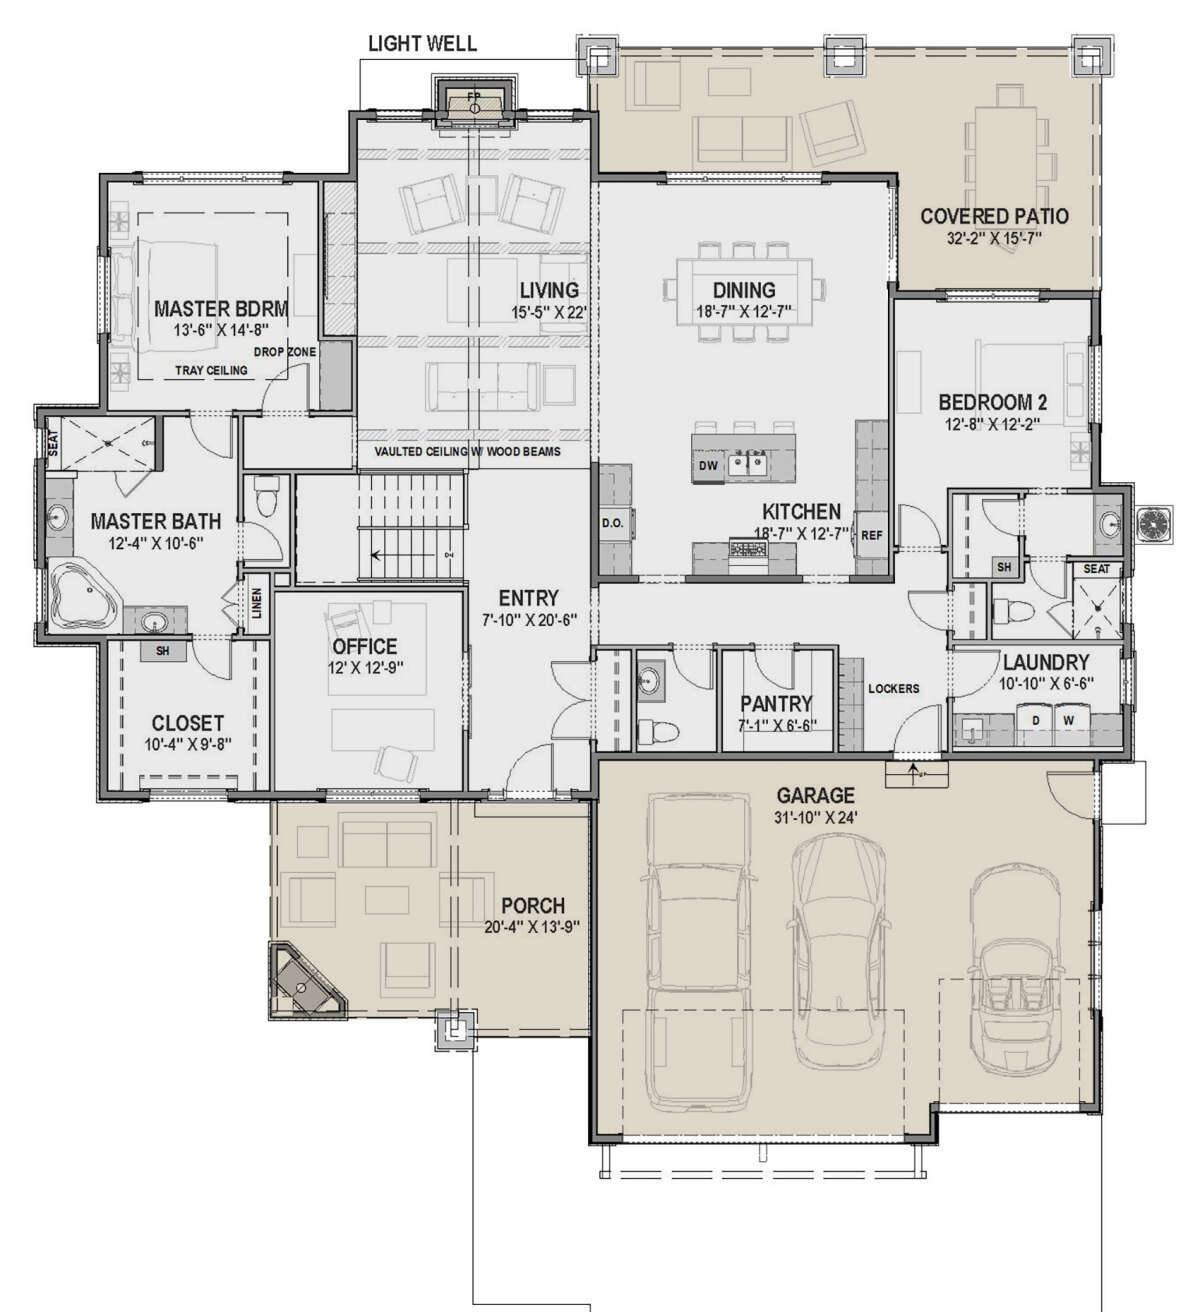 Country Plan: 2,470 Square Feet, 2 Bedrooms, 2.5 Bathrooms - 425-00037